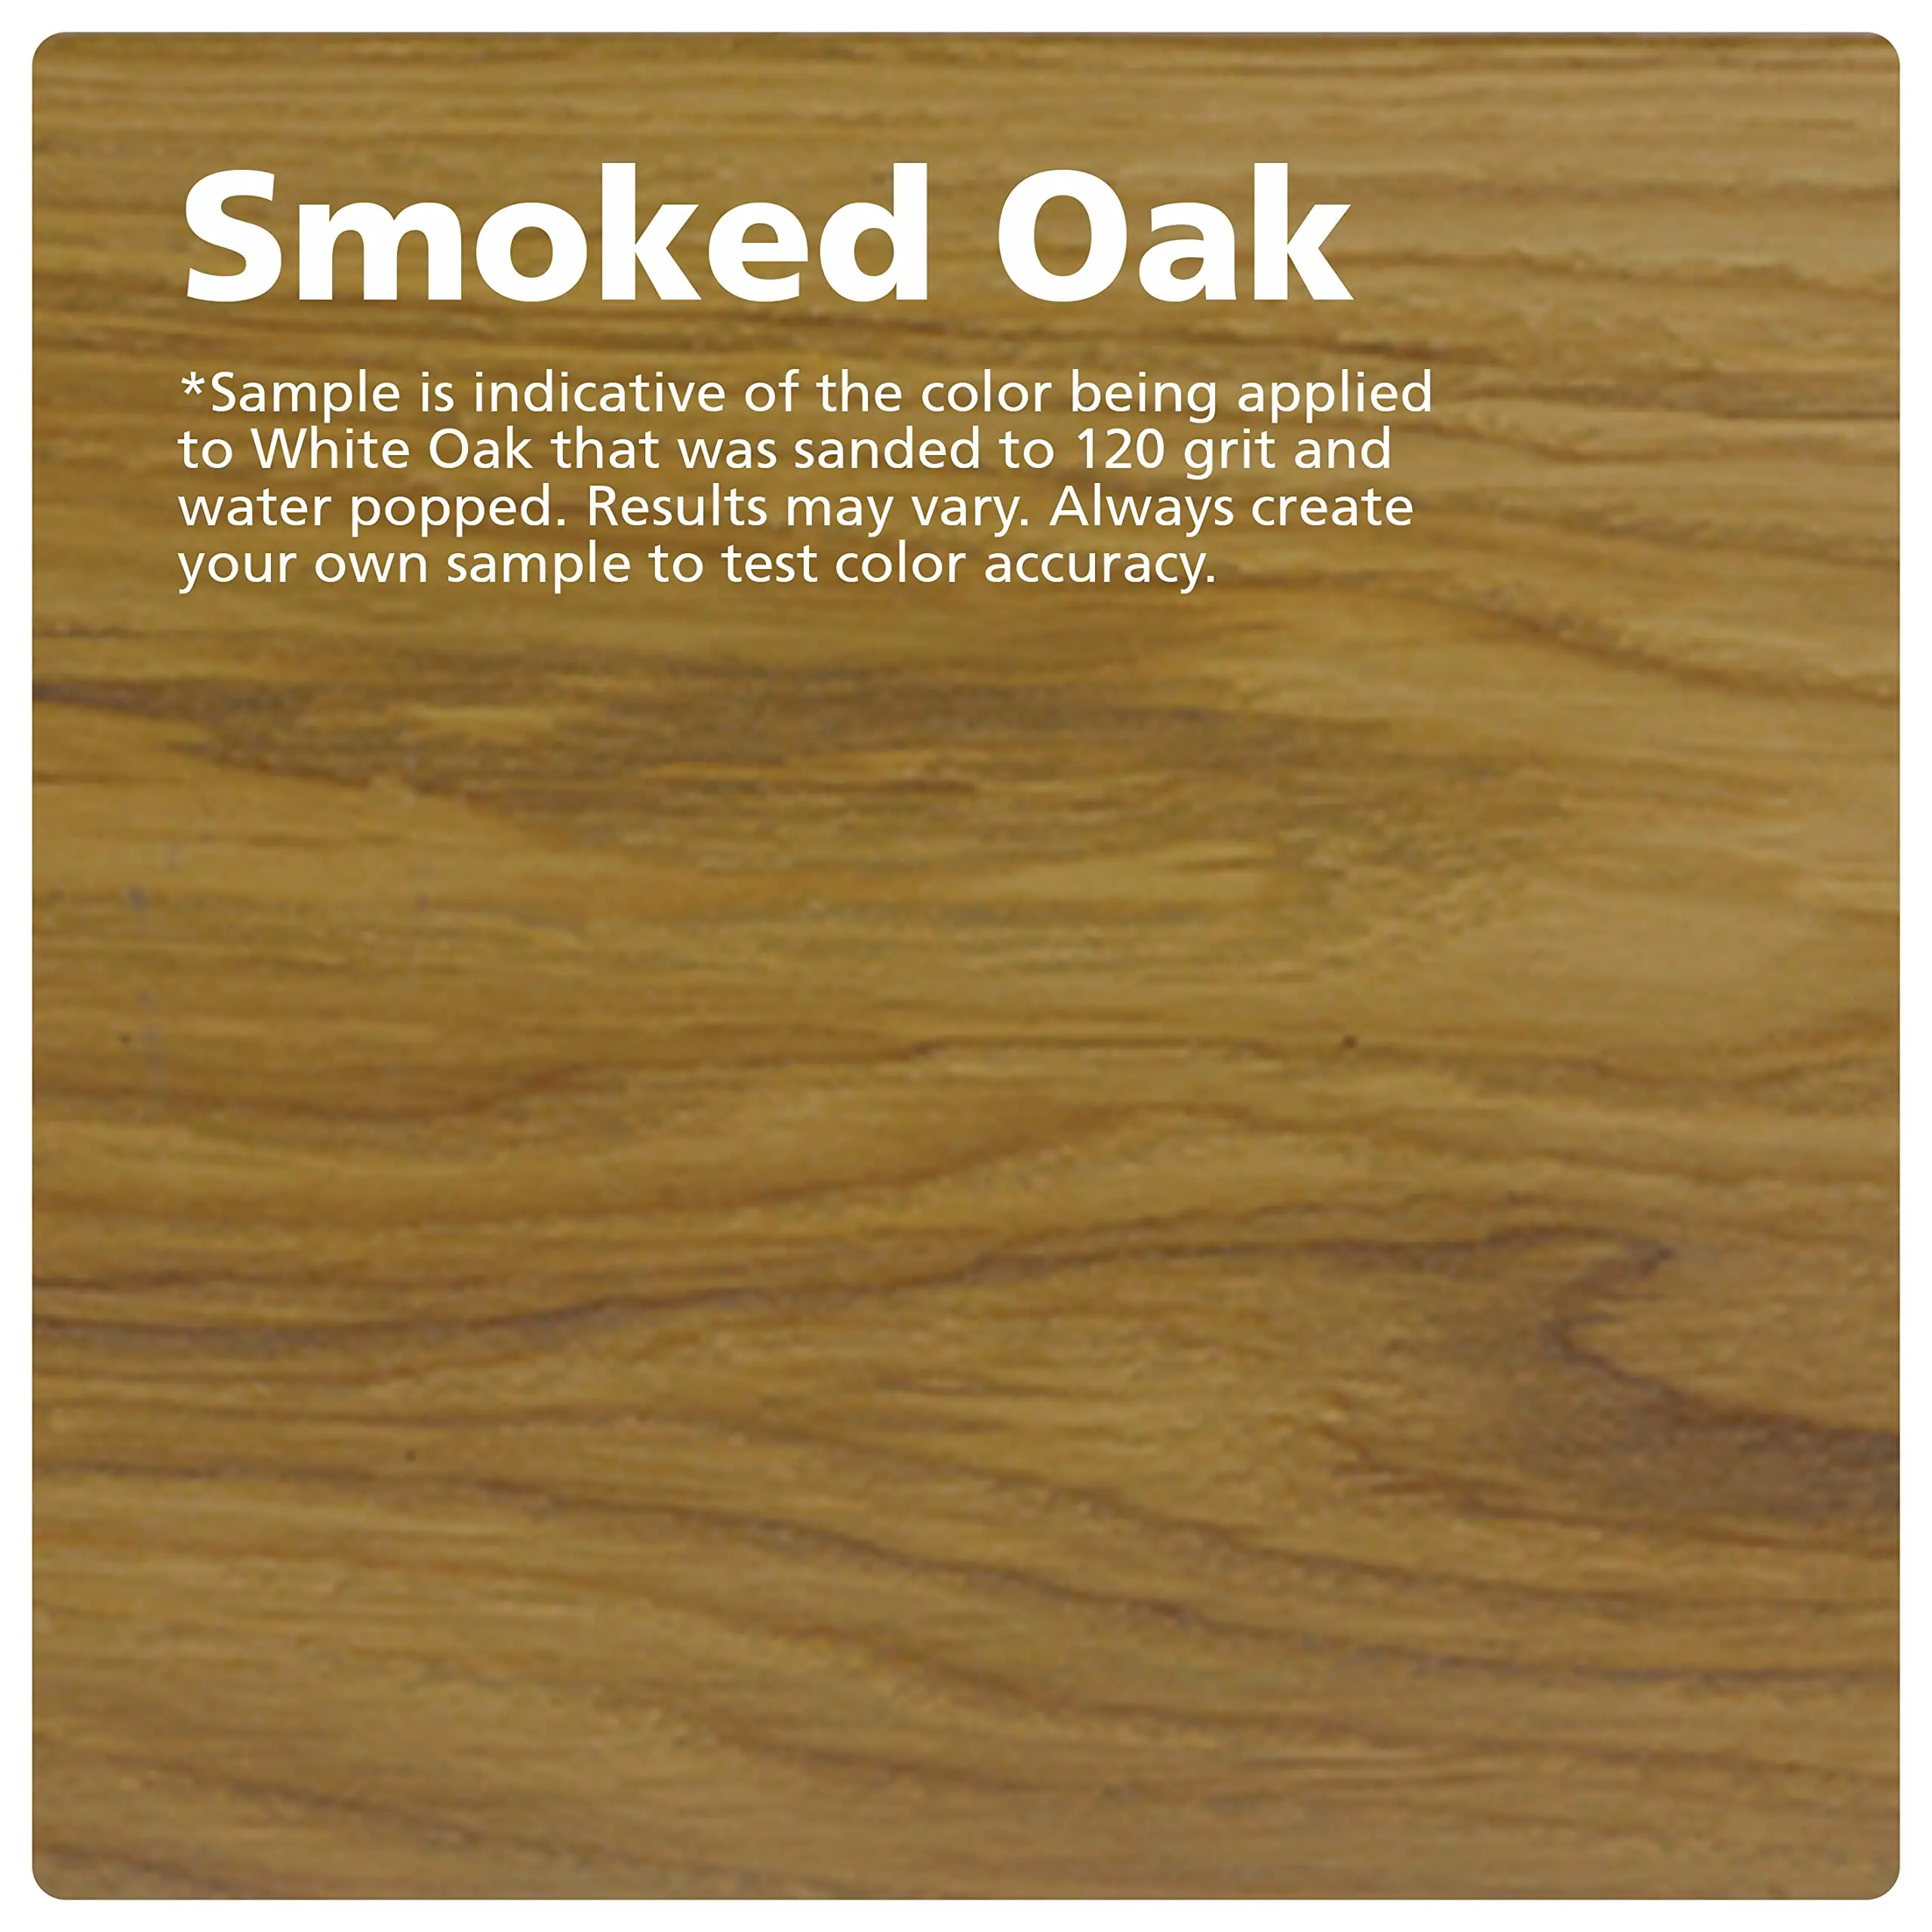 monocoat smoked oak - What are the side effects of monocoat